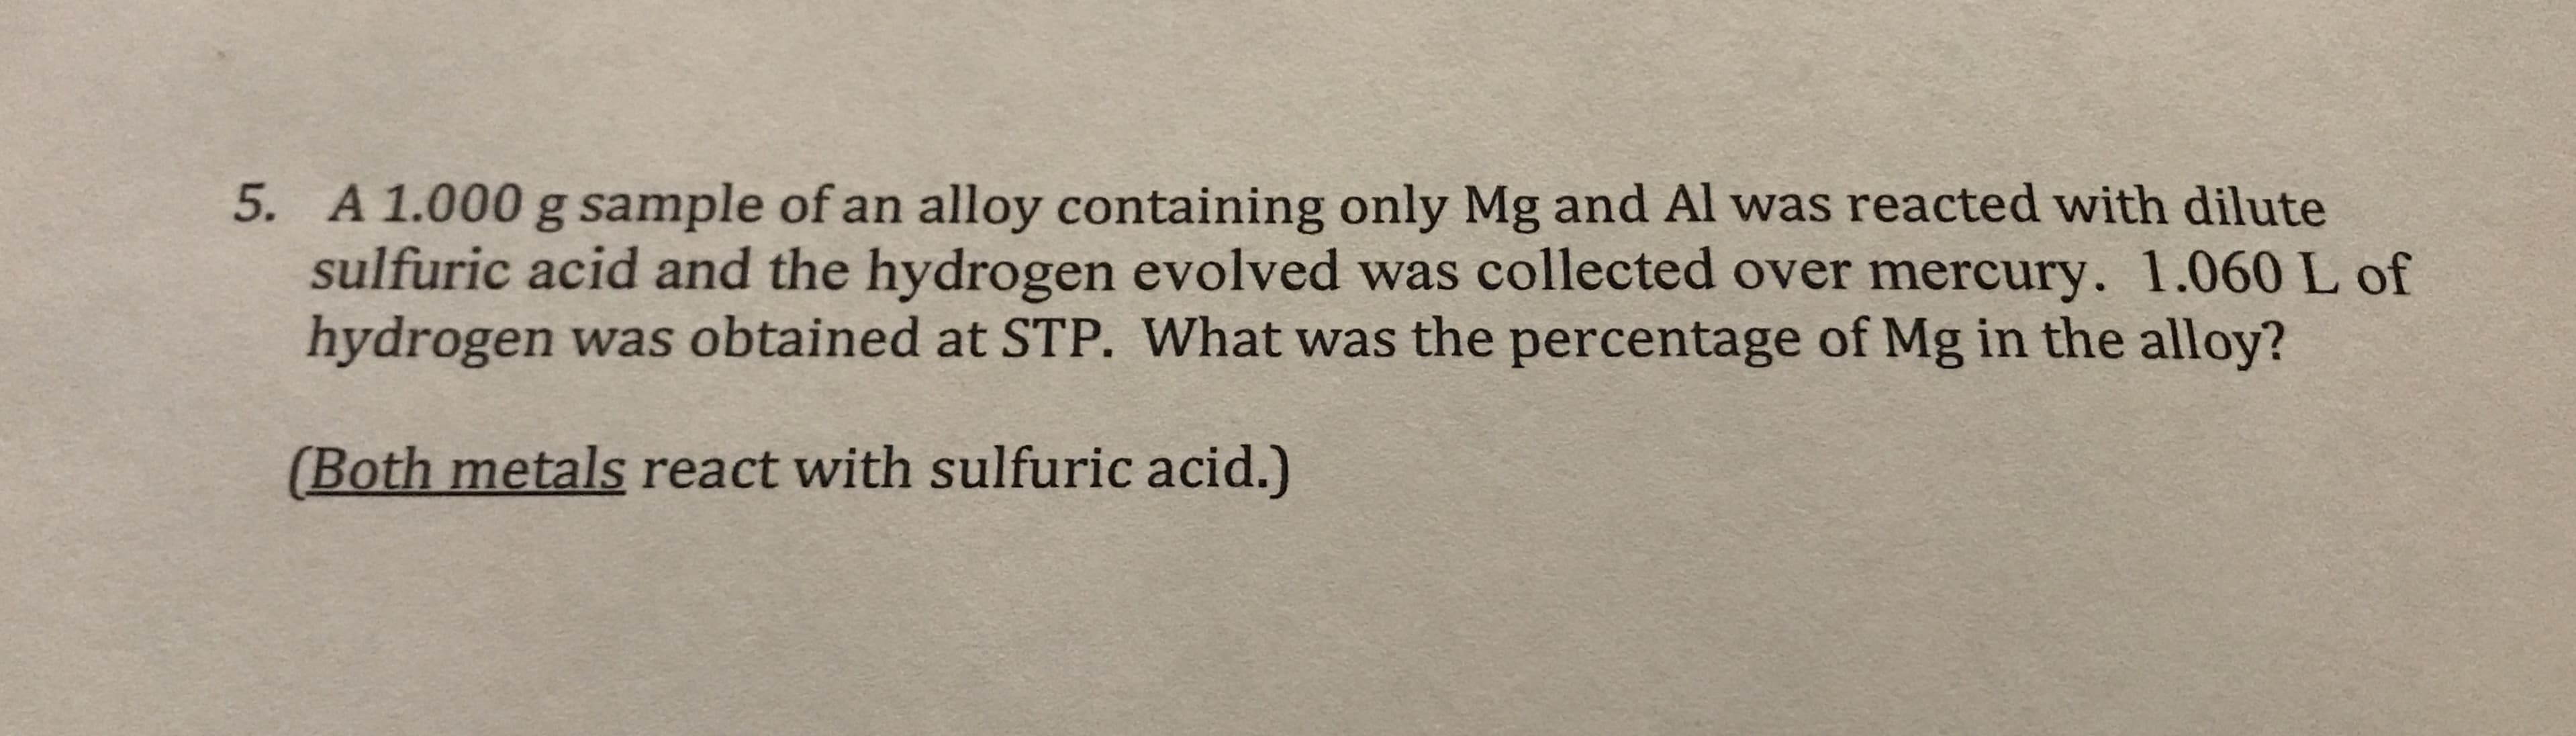 5. A 1.000 g sample of an alloy containing only Mg and Al was reacted with dilute
sulfuric acid and the hydrogen evolved was collected over mercury. 1.060 L of
hydrogen was obtained at STP. What was the percentage of Mg in the alloy?
(Both metals react with sulfuric acid.)
